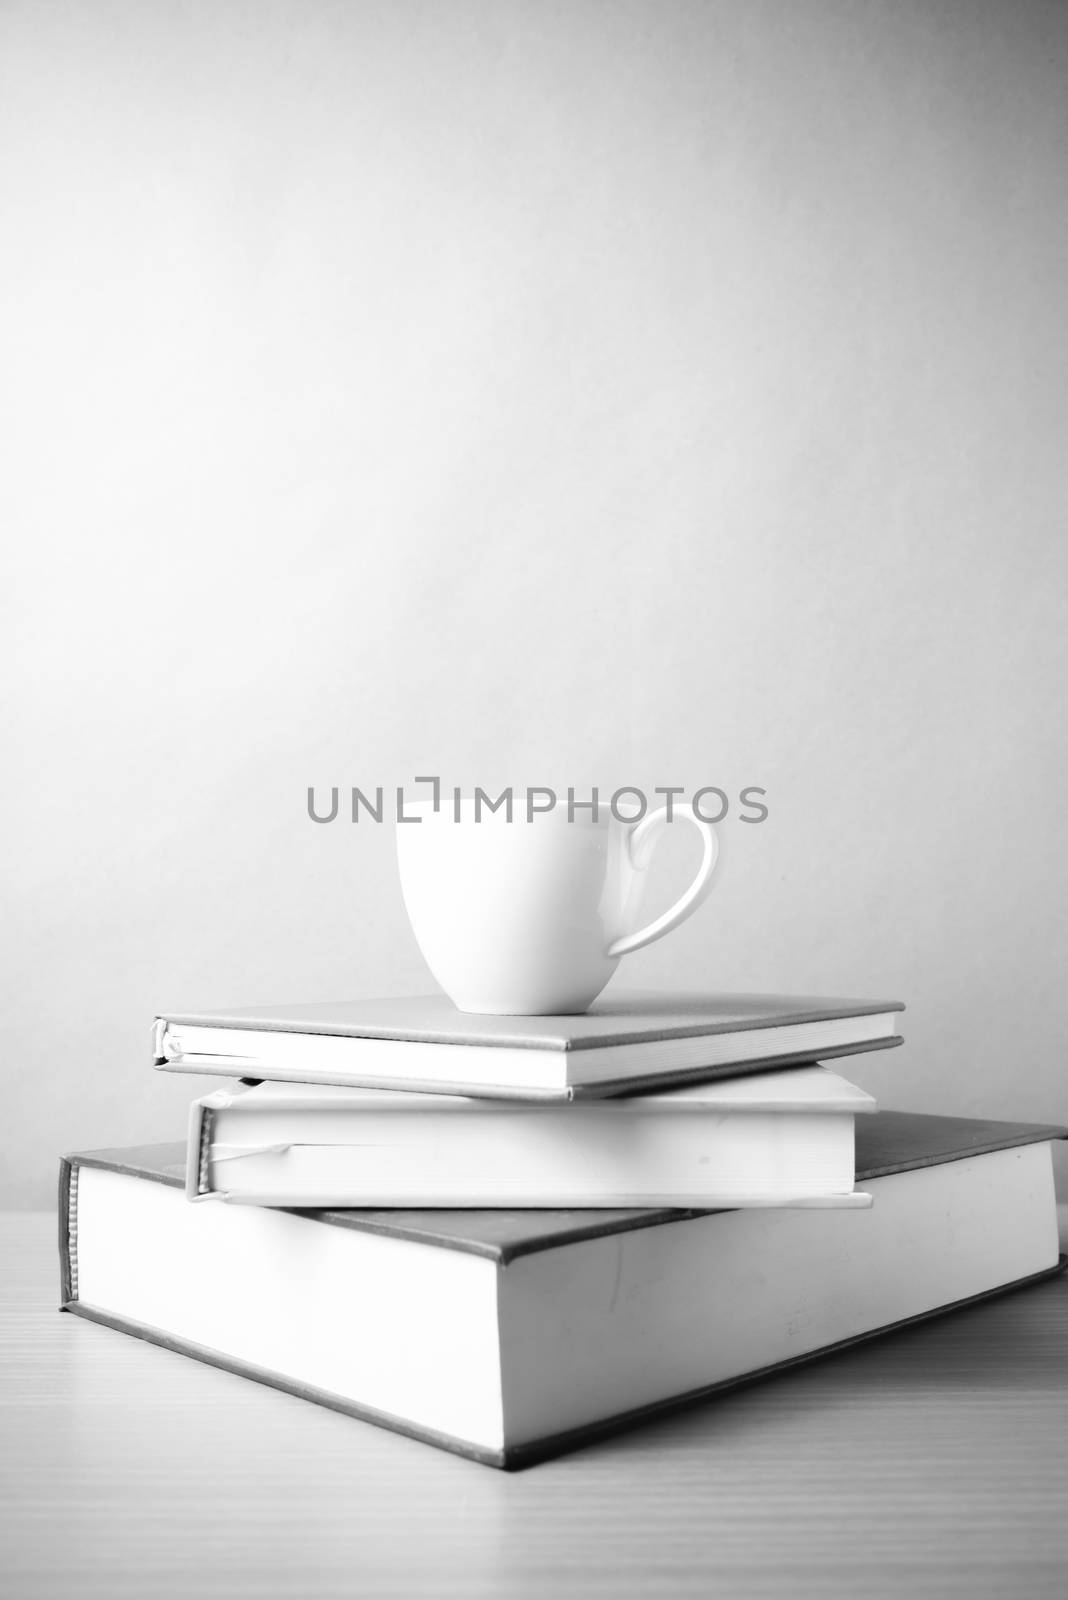 stack of book with coffee cup on wood table background black and white color tone style